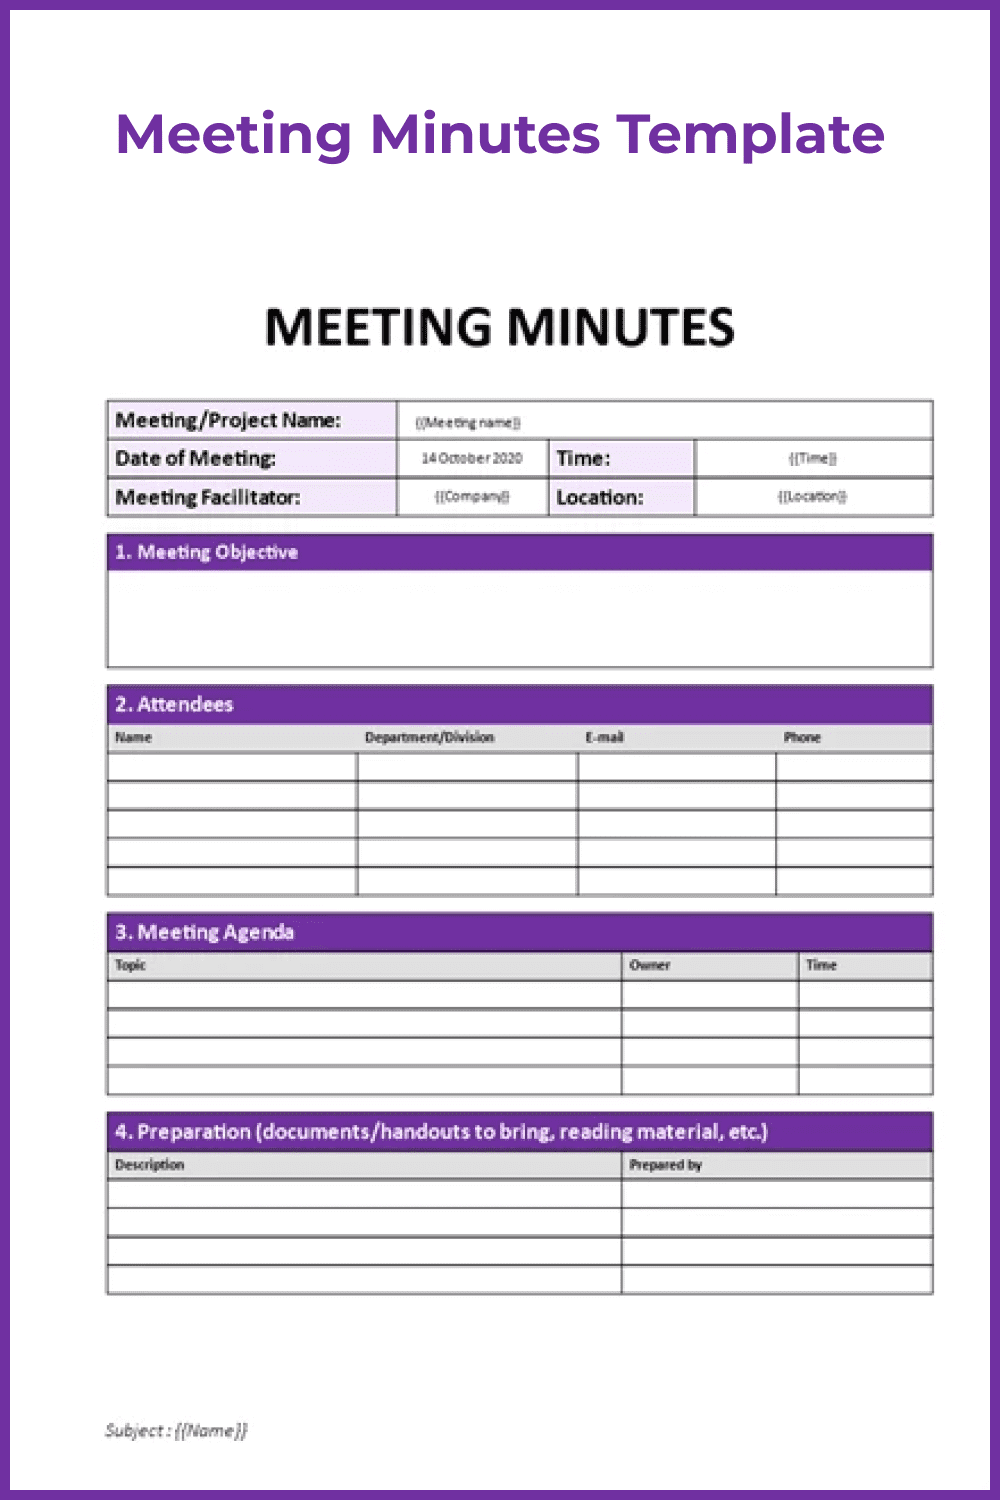 A table for conclusions after the meeting in purple.